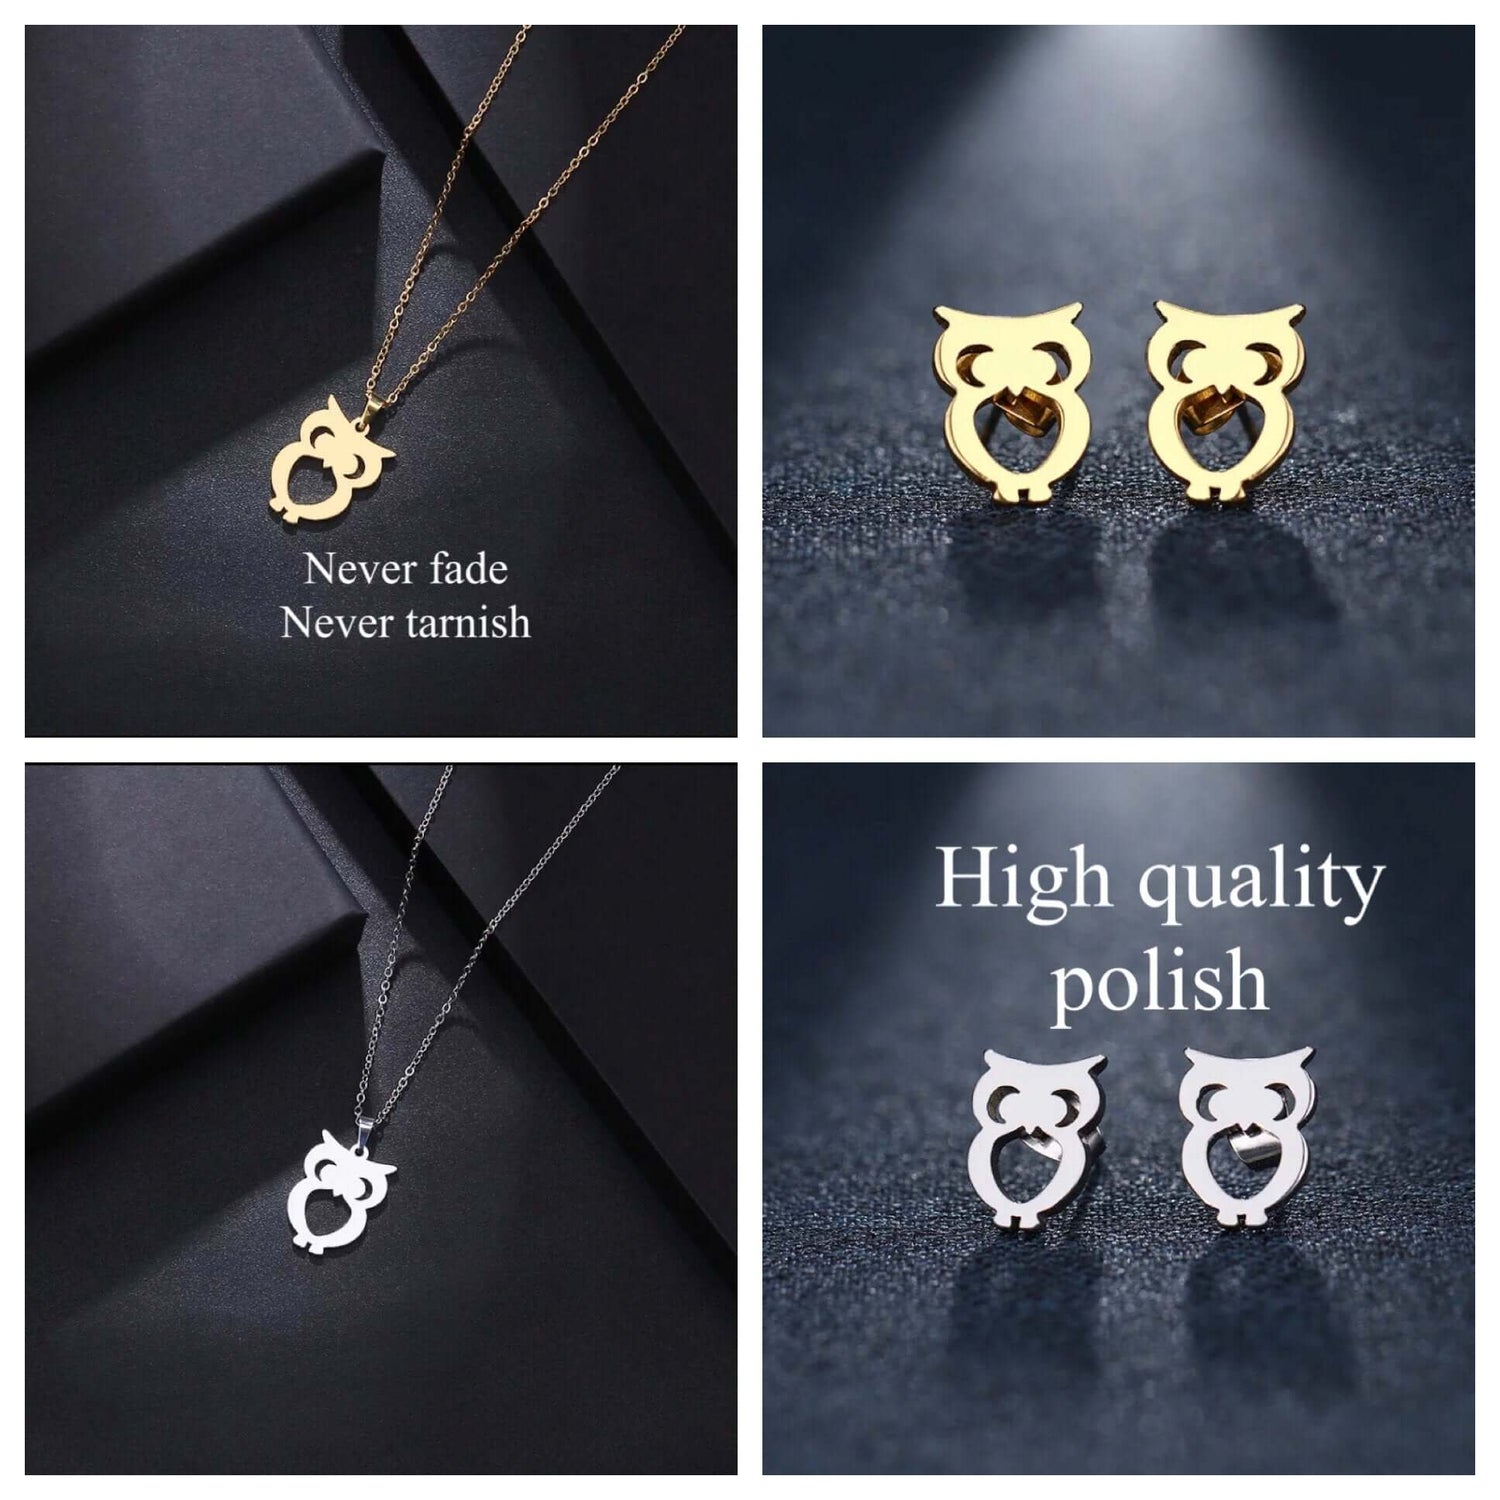 Charm Owl necklace earring set non fade jewelry gift high quality